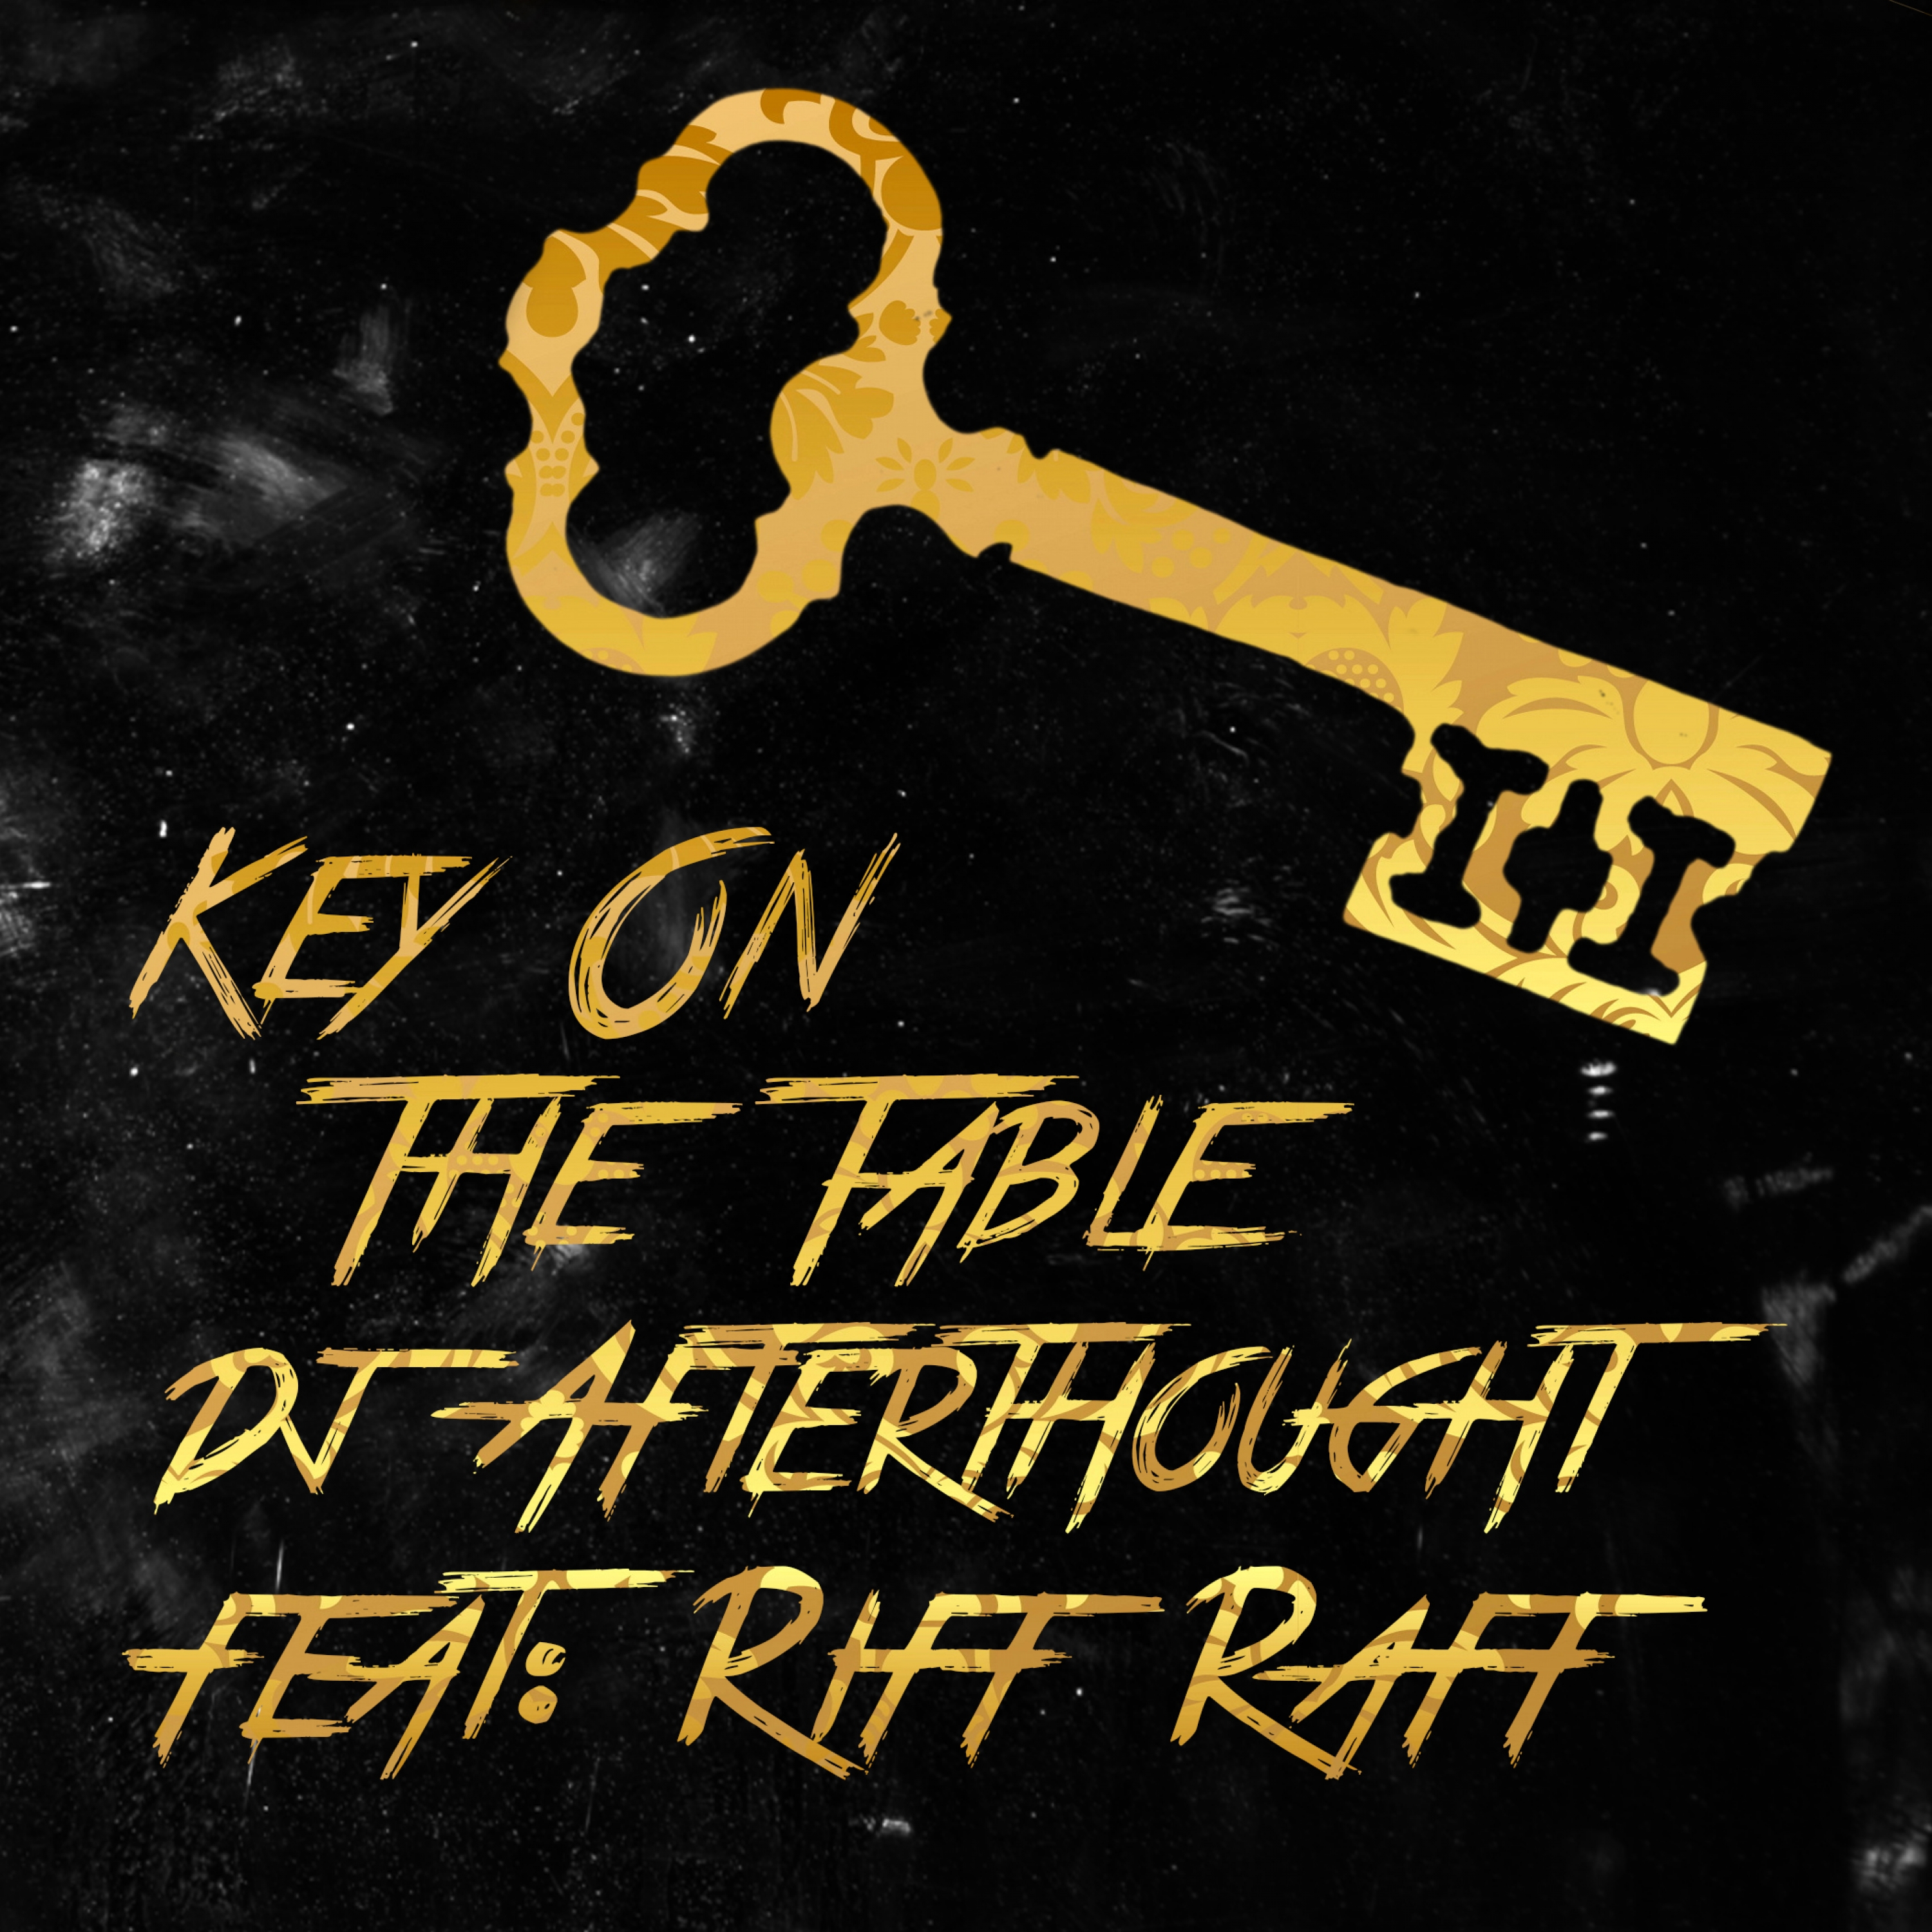 Key on the Table (feat. Riff Raff)